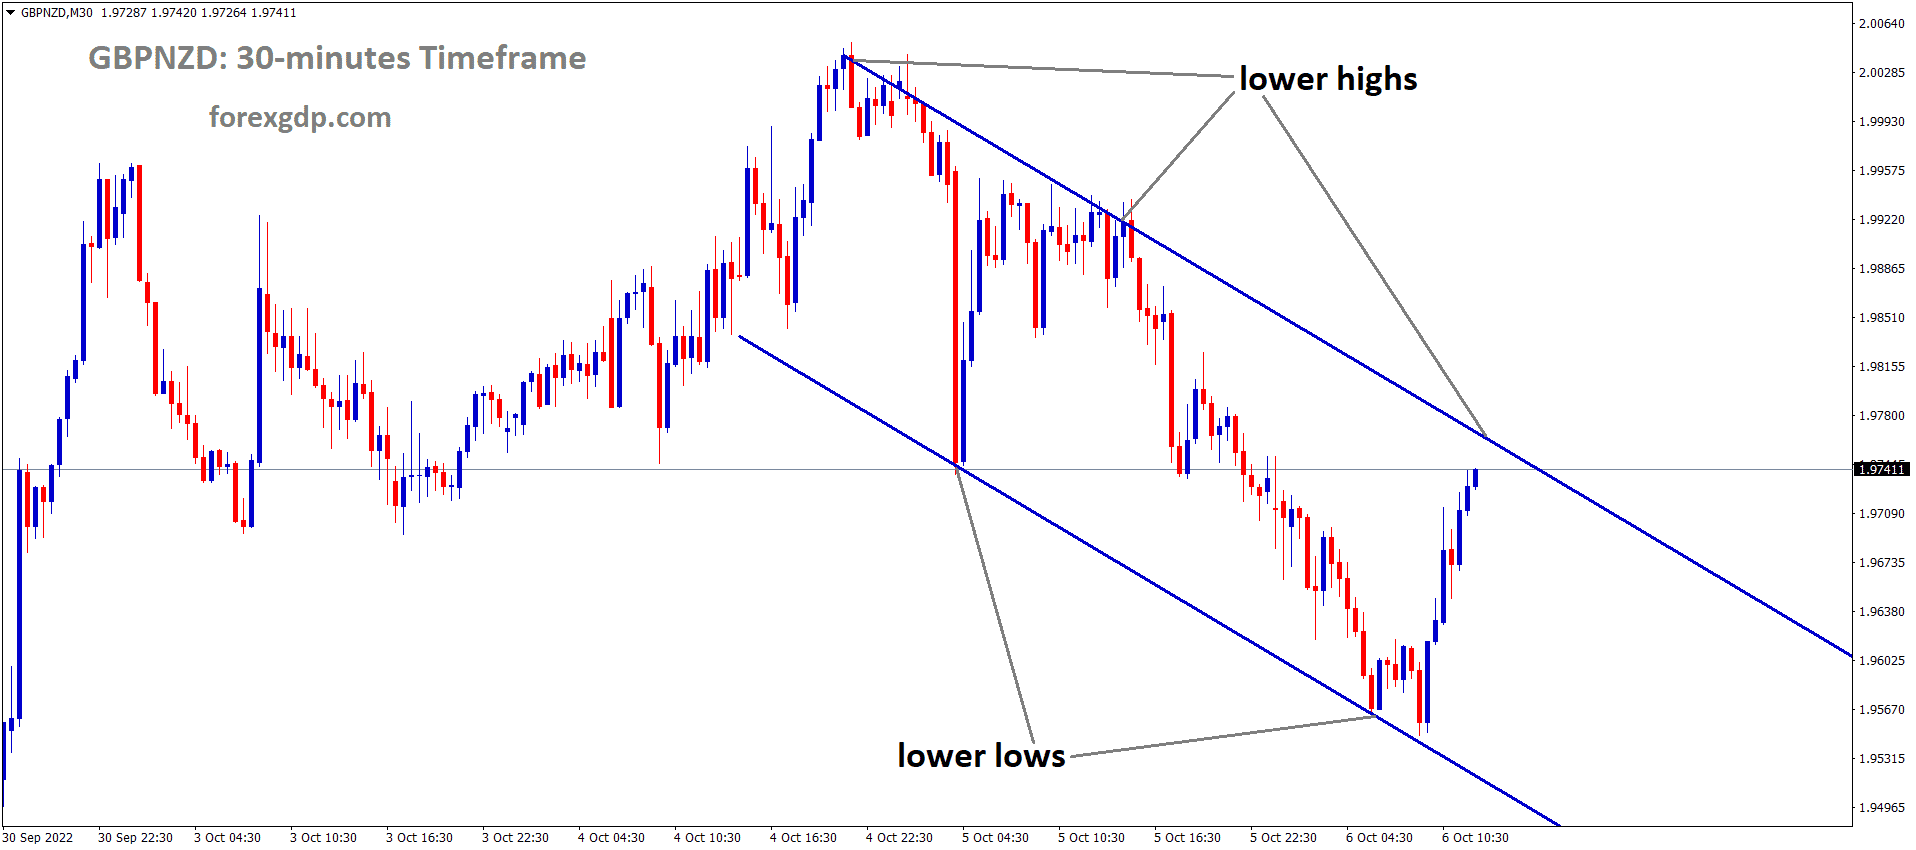 GBPNZD is moving in the descending channel and the market has reached the Lower high area of the channel